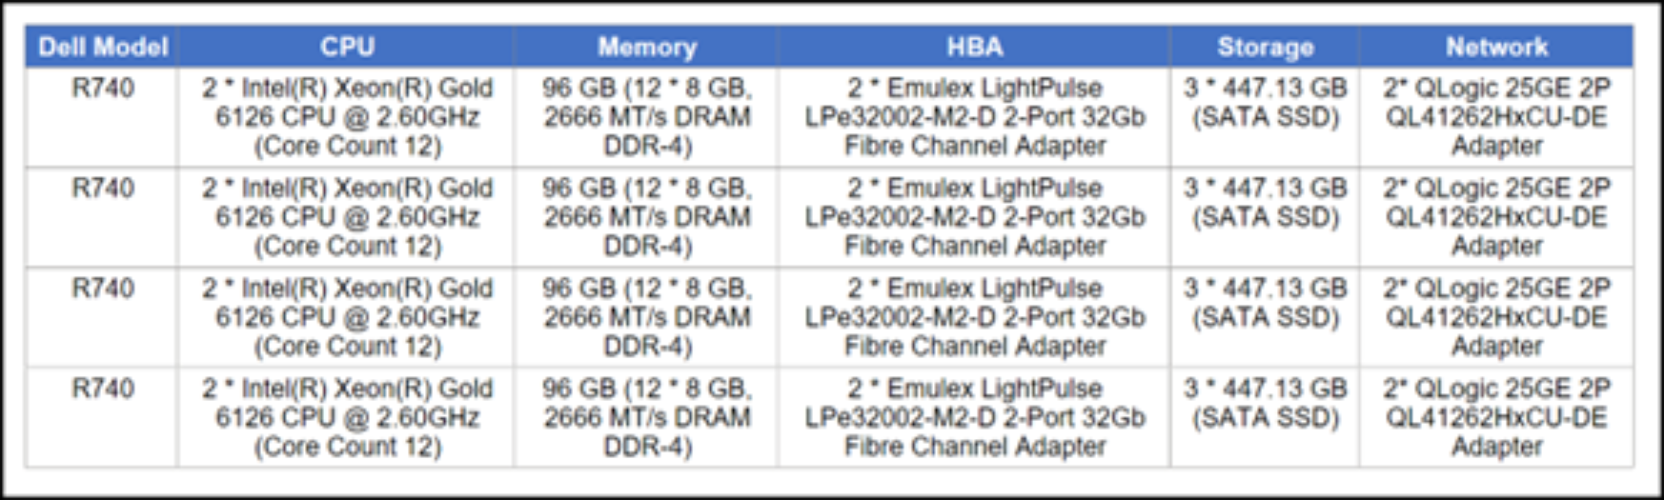 A table that lists the Dell model, CPU, memory, HBA, storage and network specifications